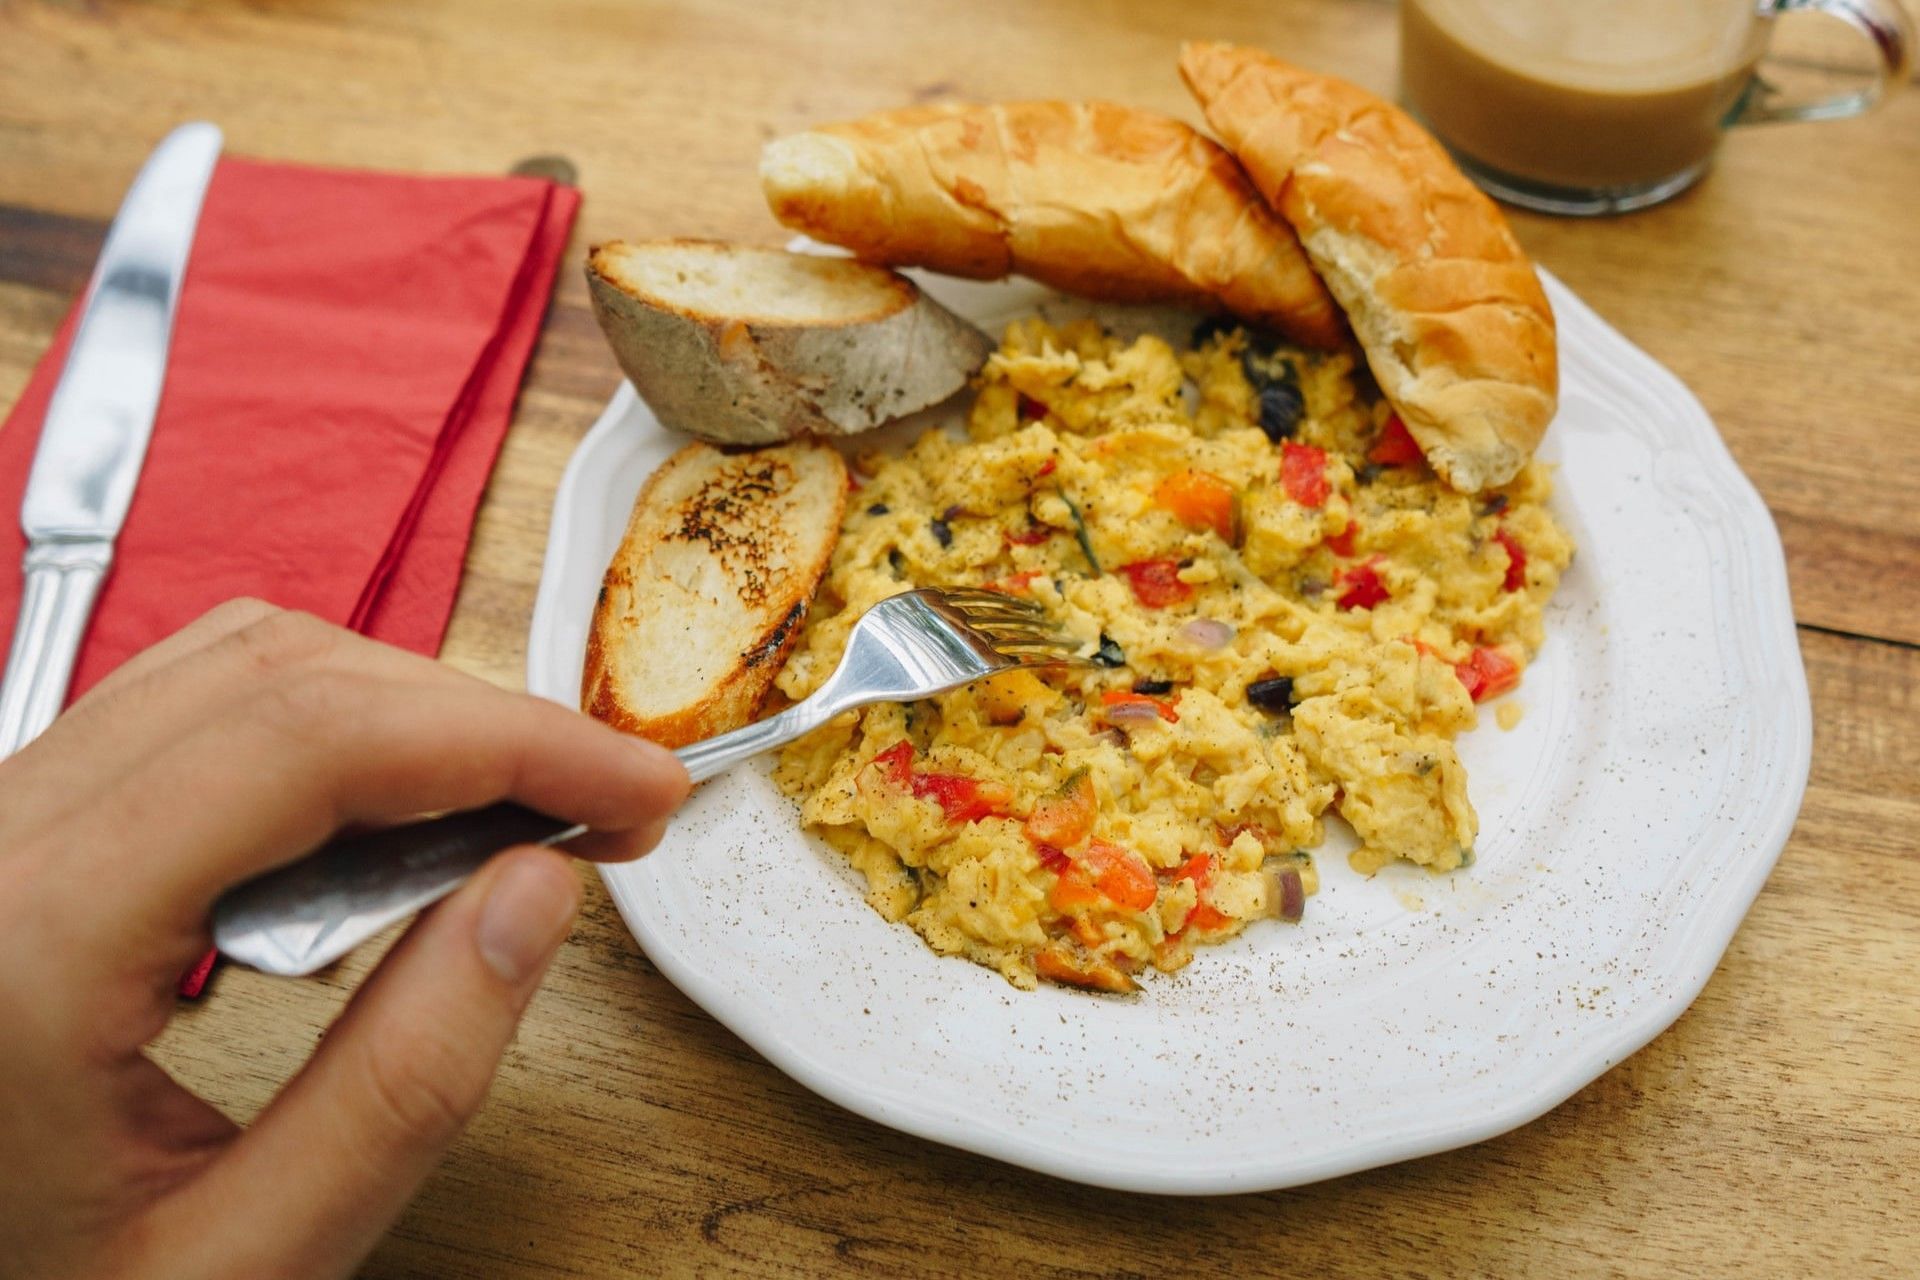 Calories in Scrambled Eggs – Nutrition Facts